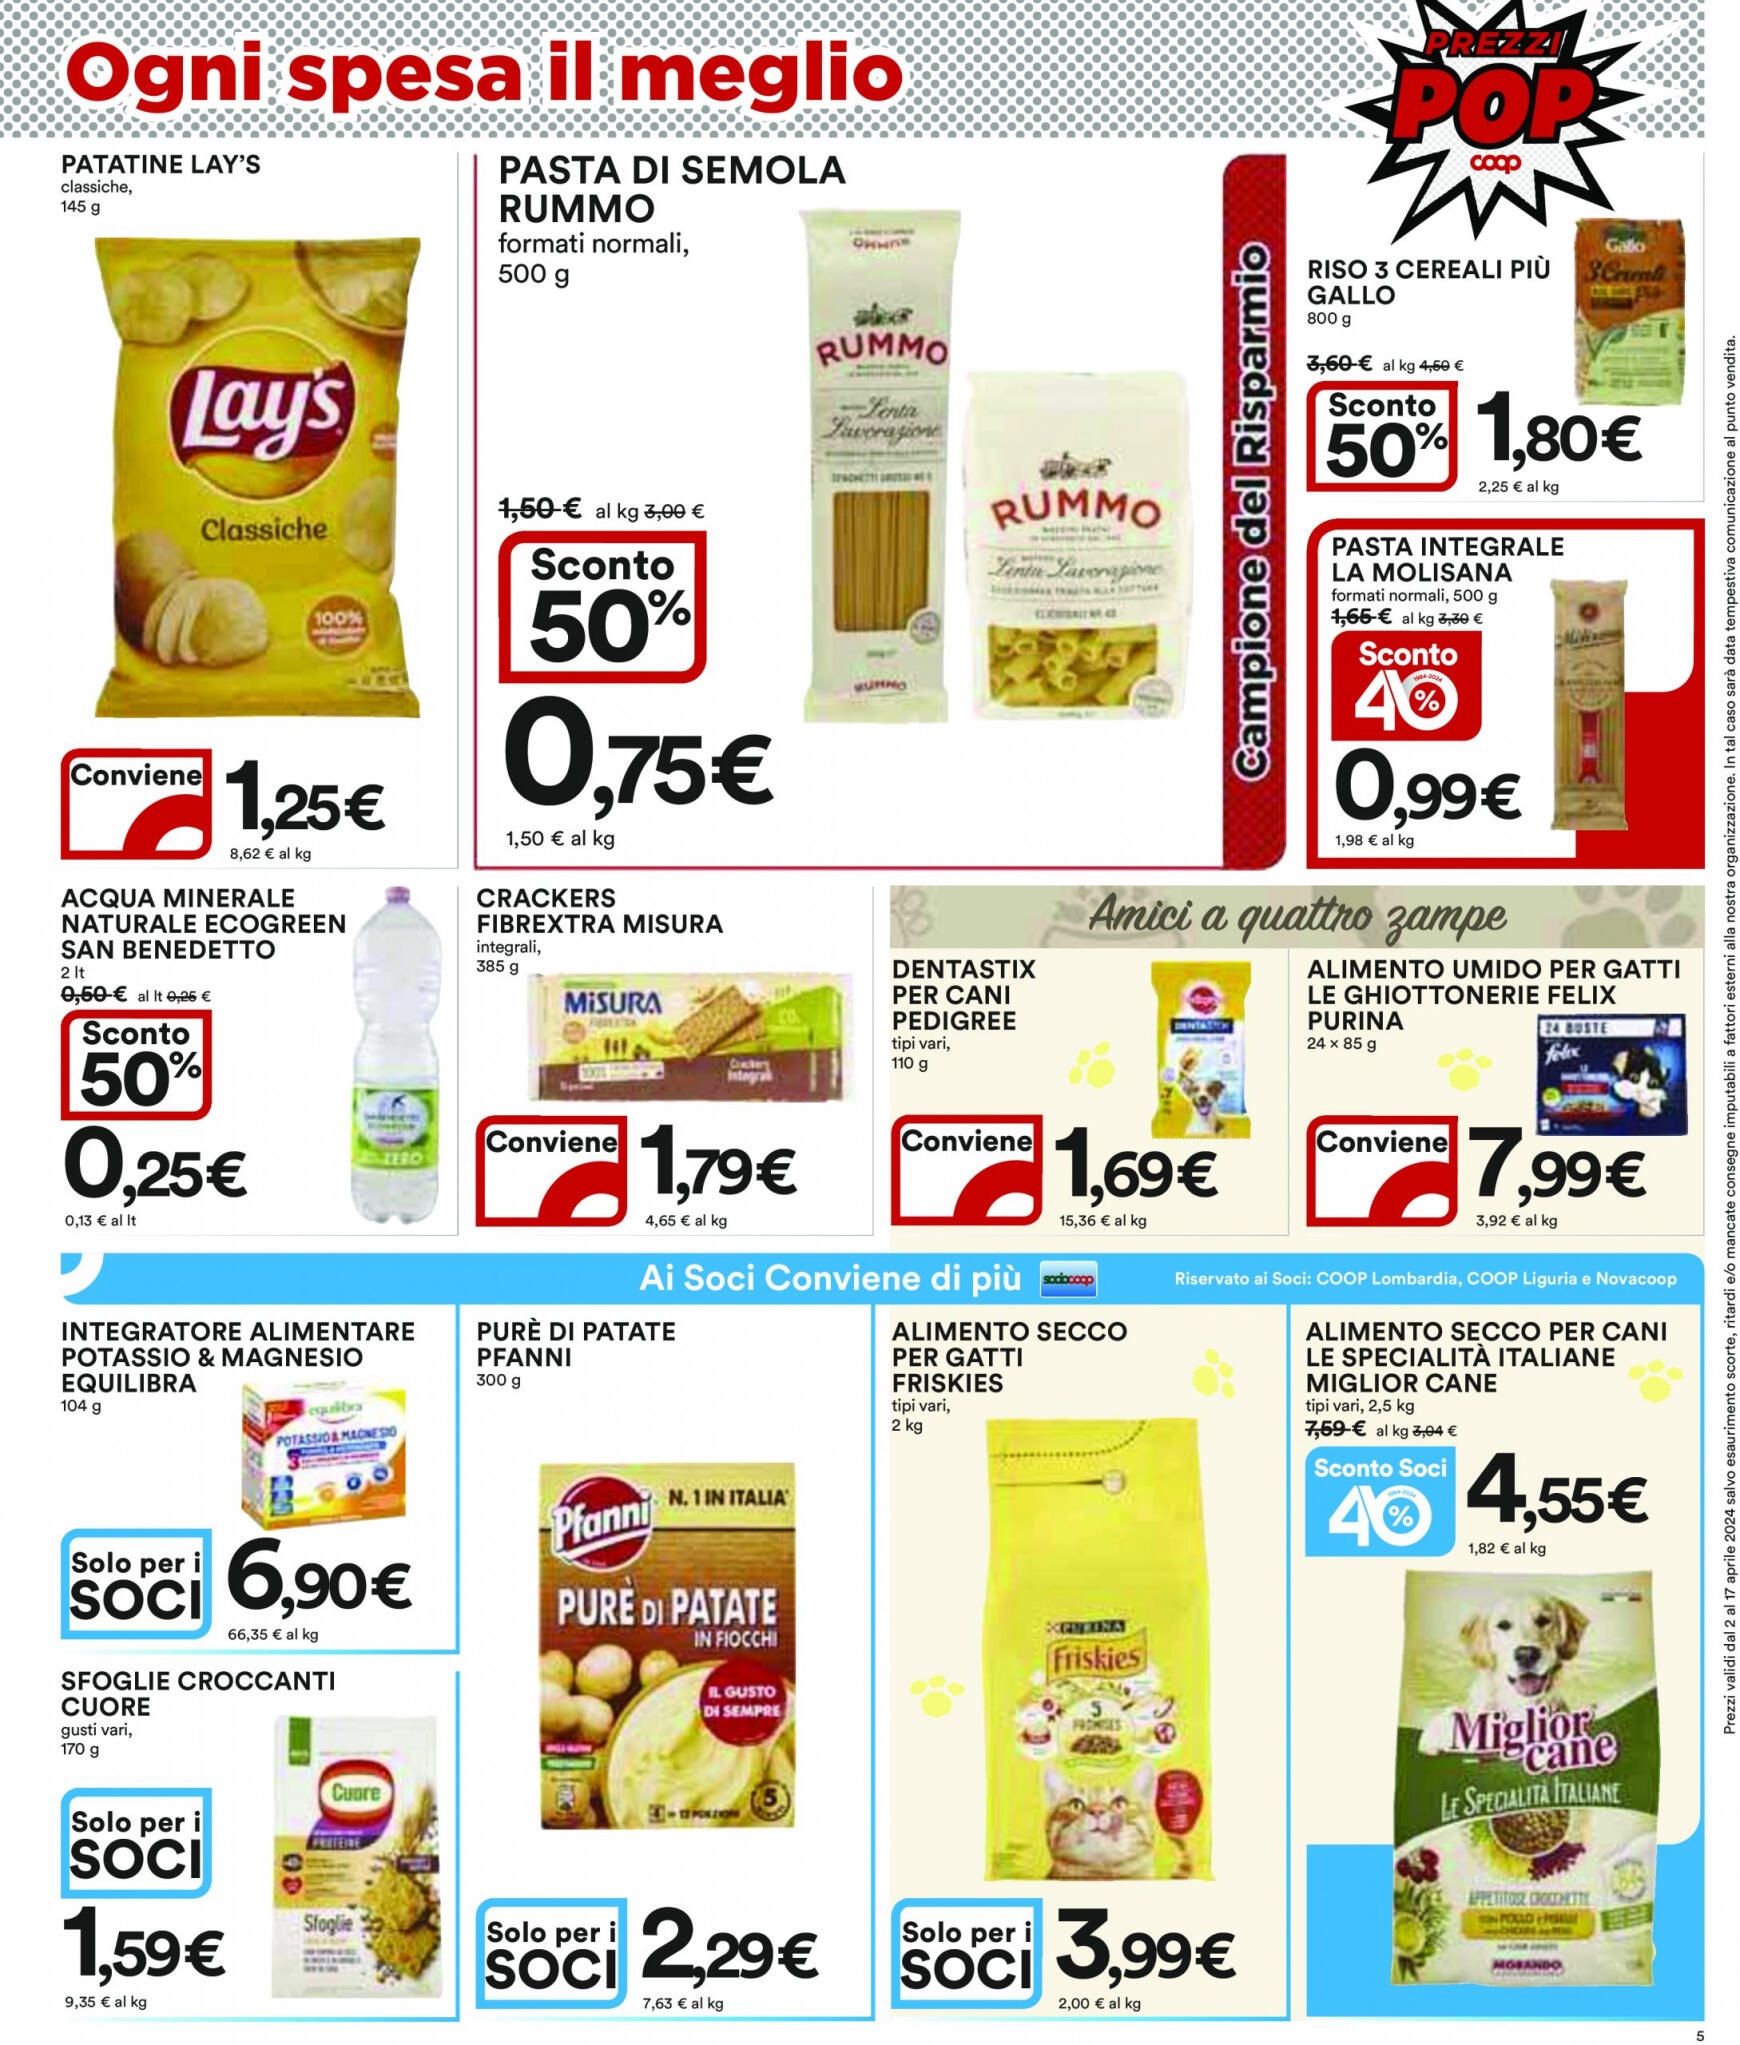 coop - Nuovo volantino Coop 02.04. - 17.04. - page: 5